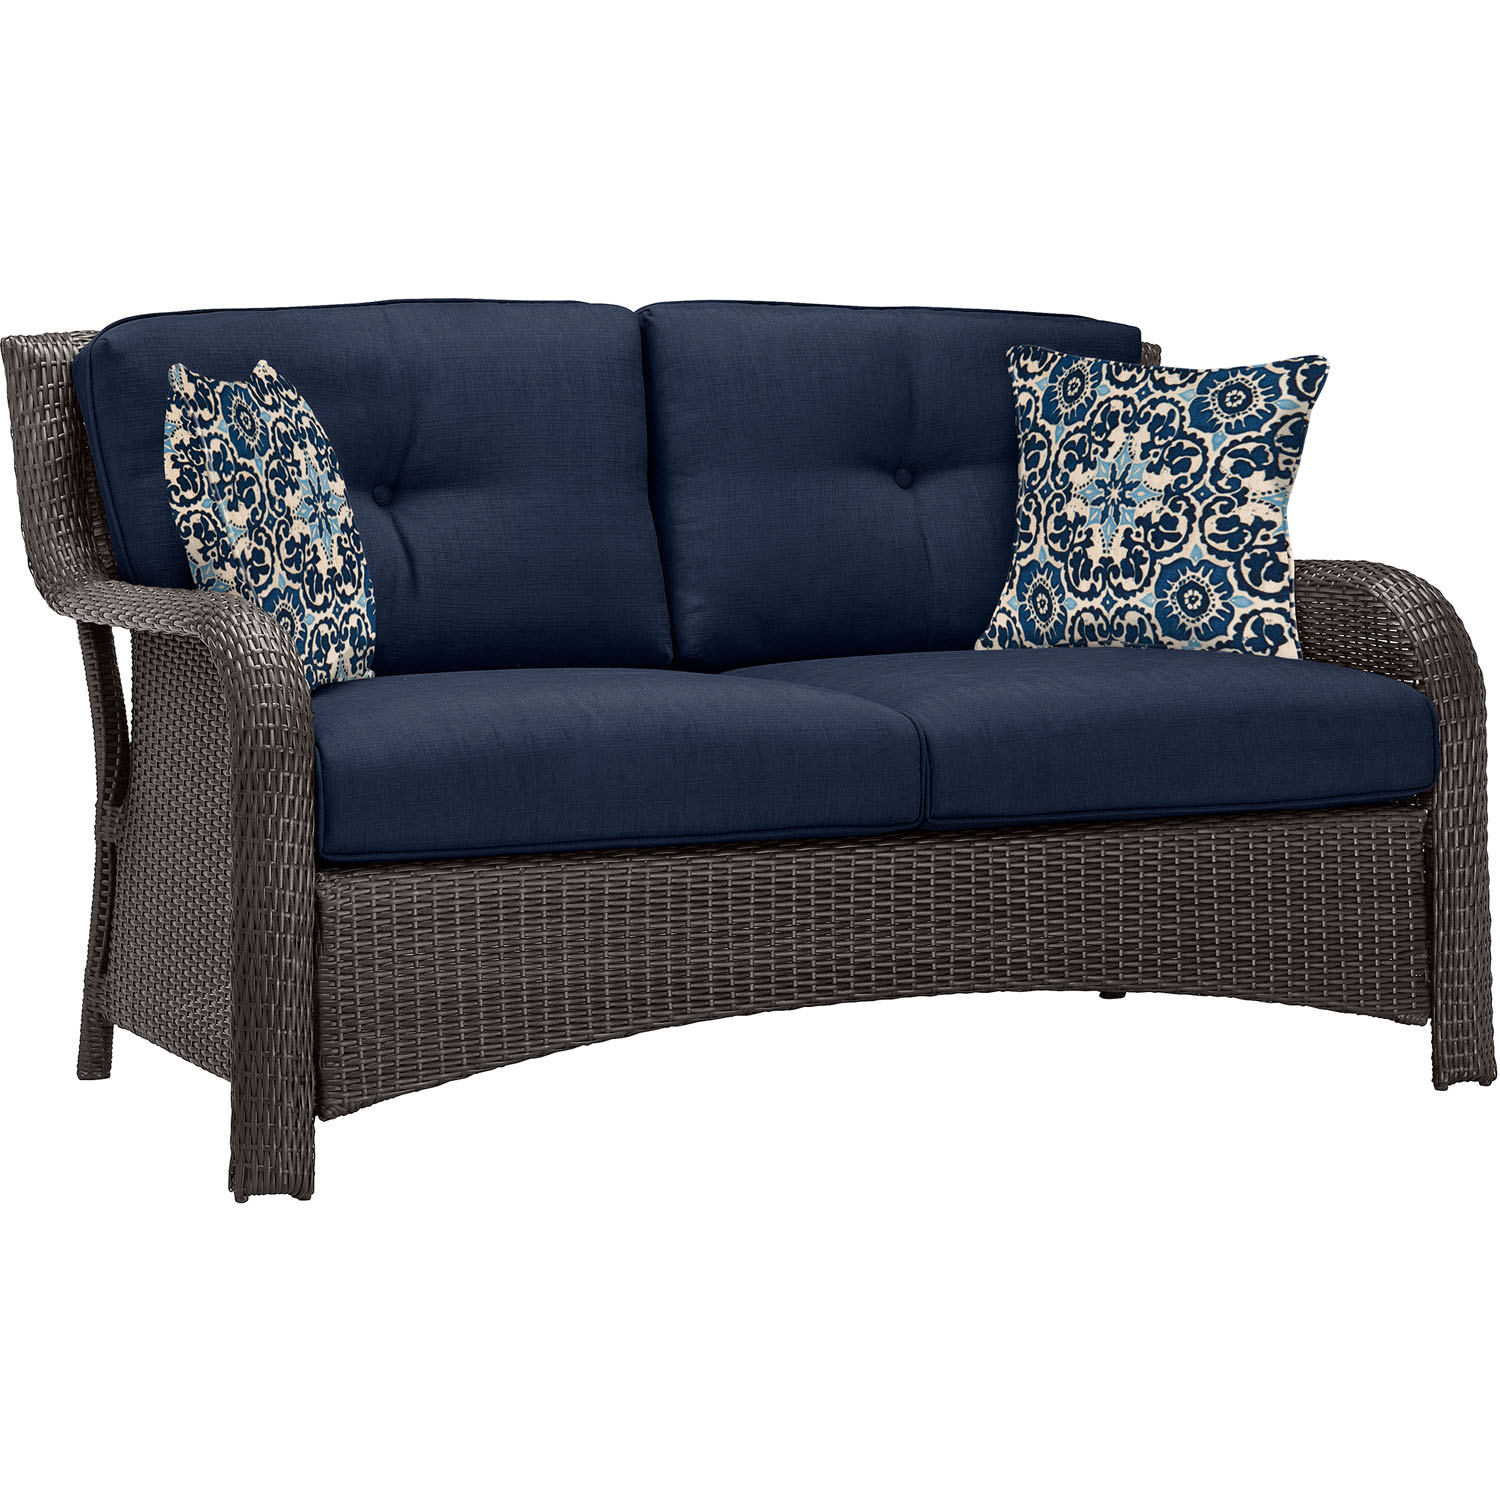 Hanover Strathmere 6-Piece Steel Outdoor Patio Deep Seating Set with Brown Wicker, Navy Blue Cushions, 4 Pillows and Glass Top Rectangular Coffee Table, STRATHMERE6PCNVY - image 4 of 18